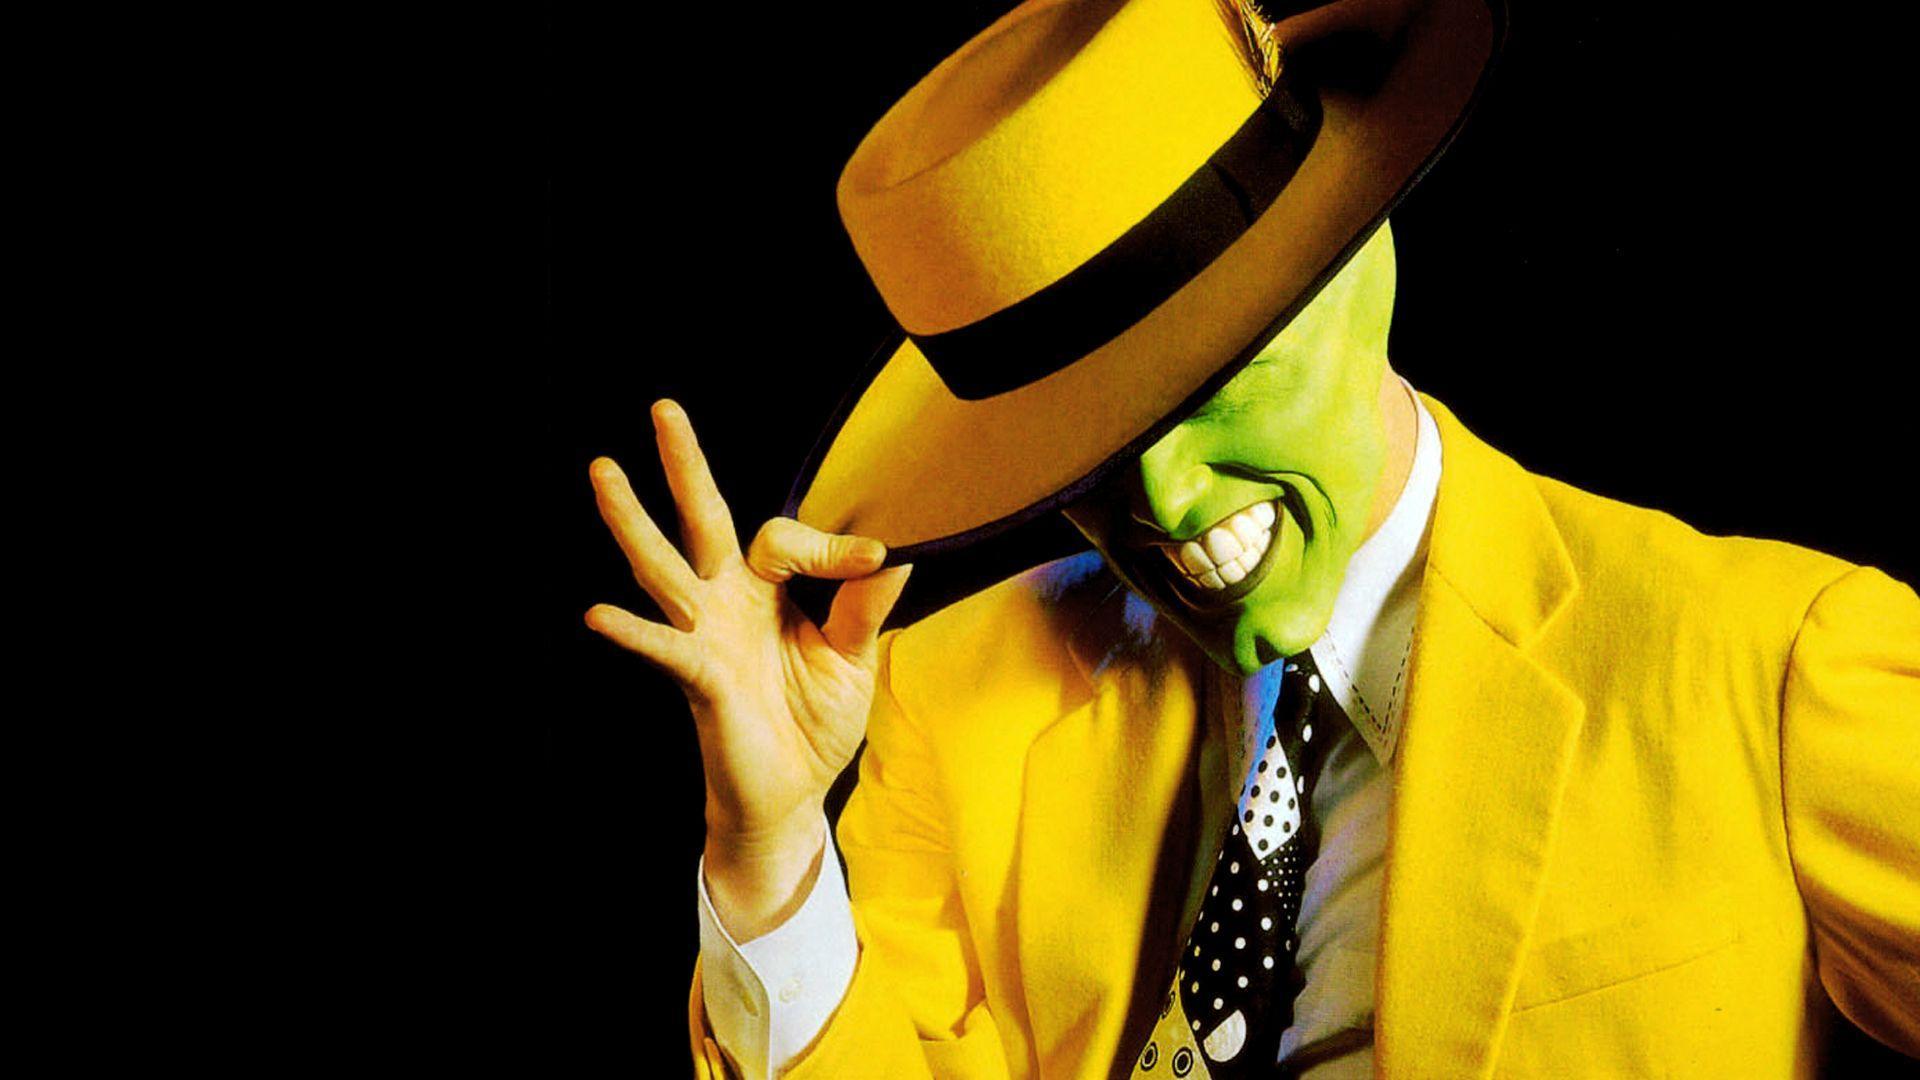 The Mask Movie Wallpaper Free The Mask Movie Background